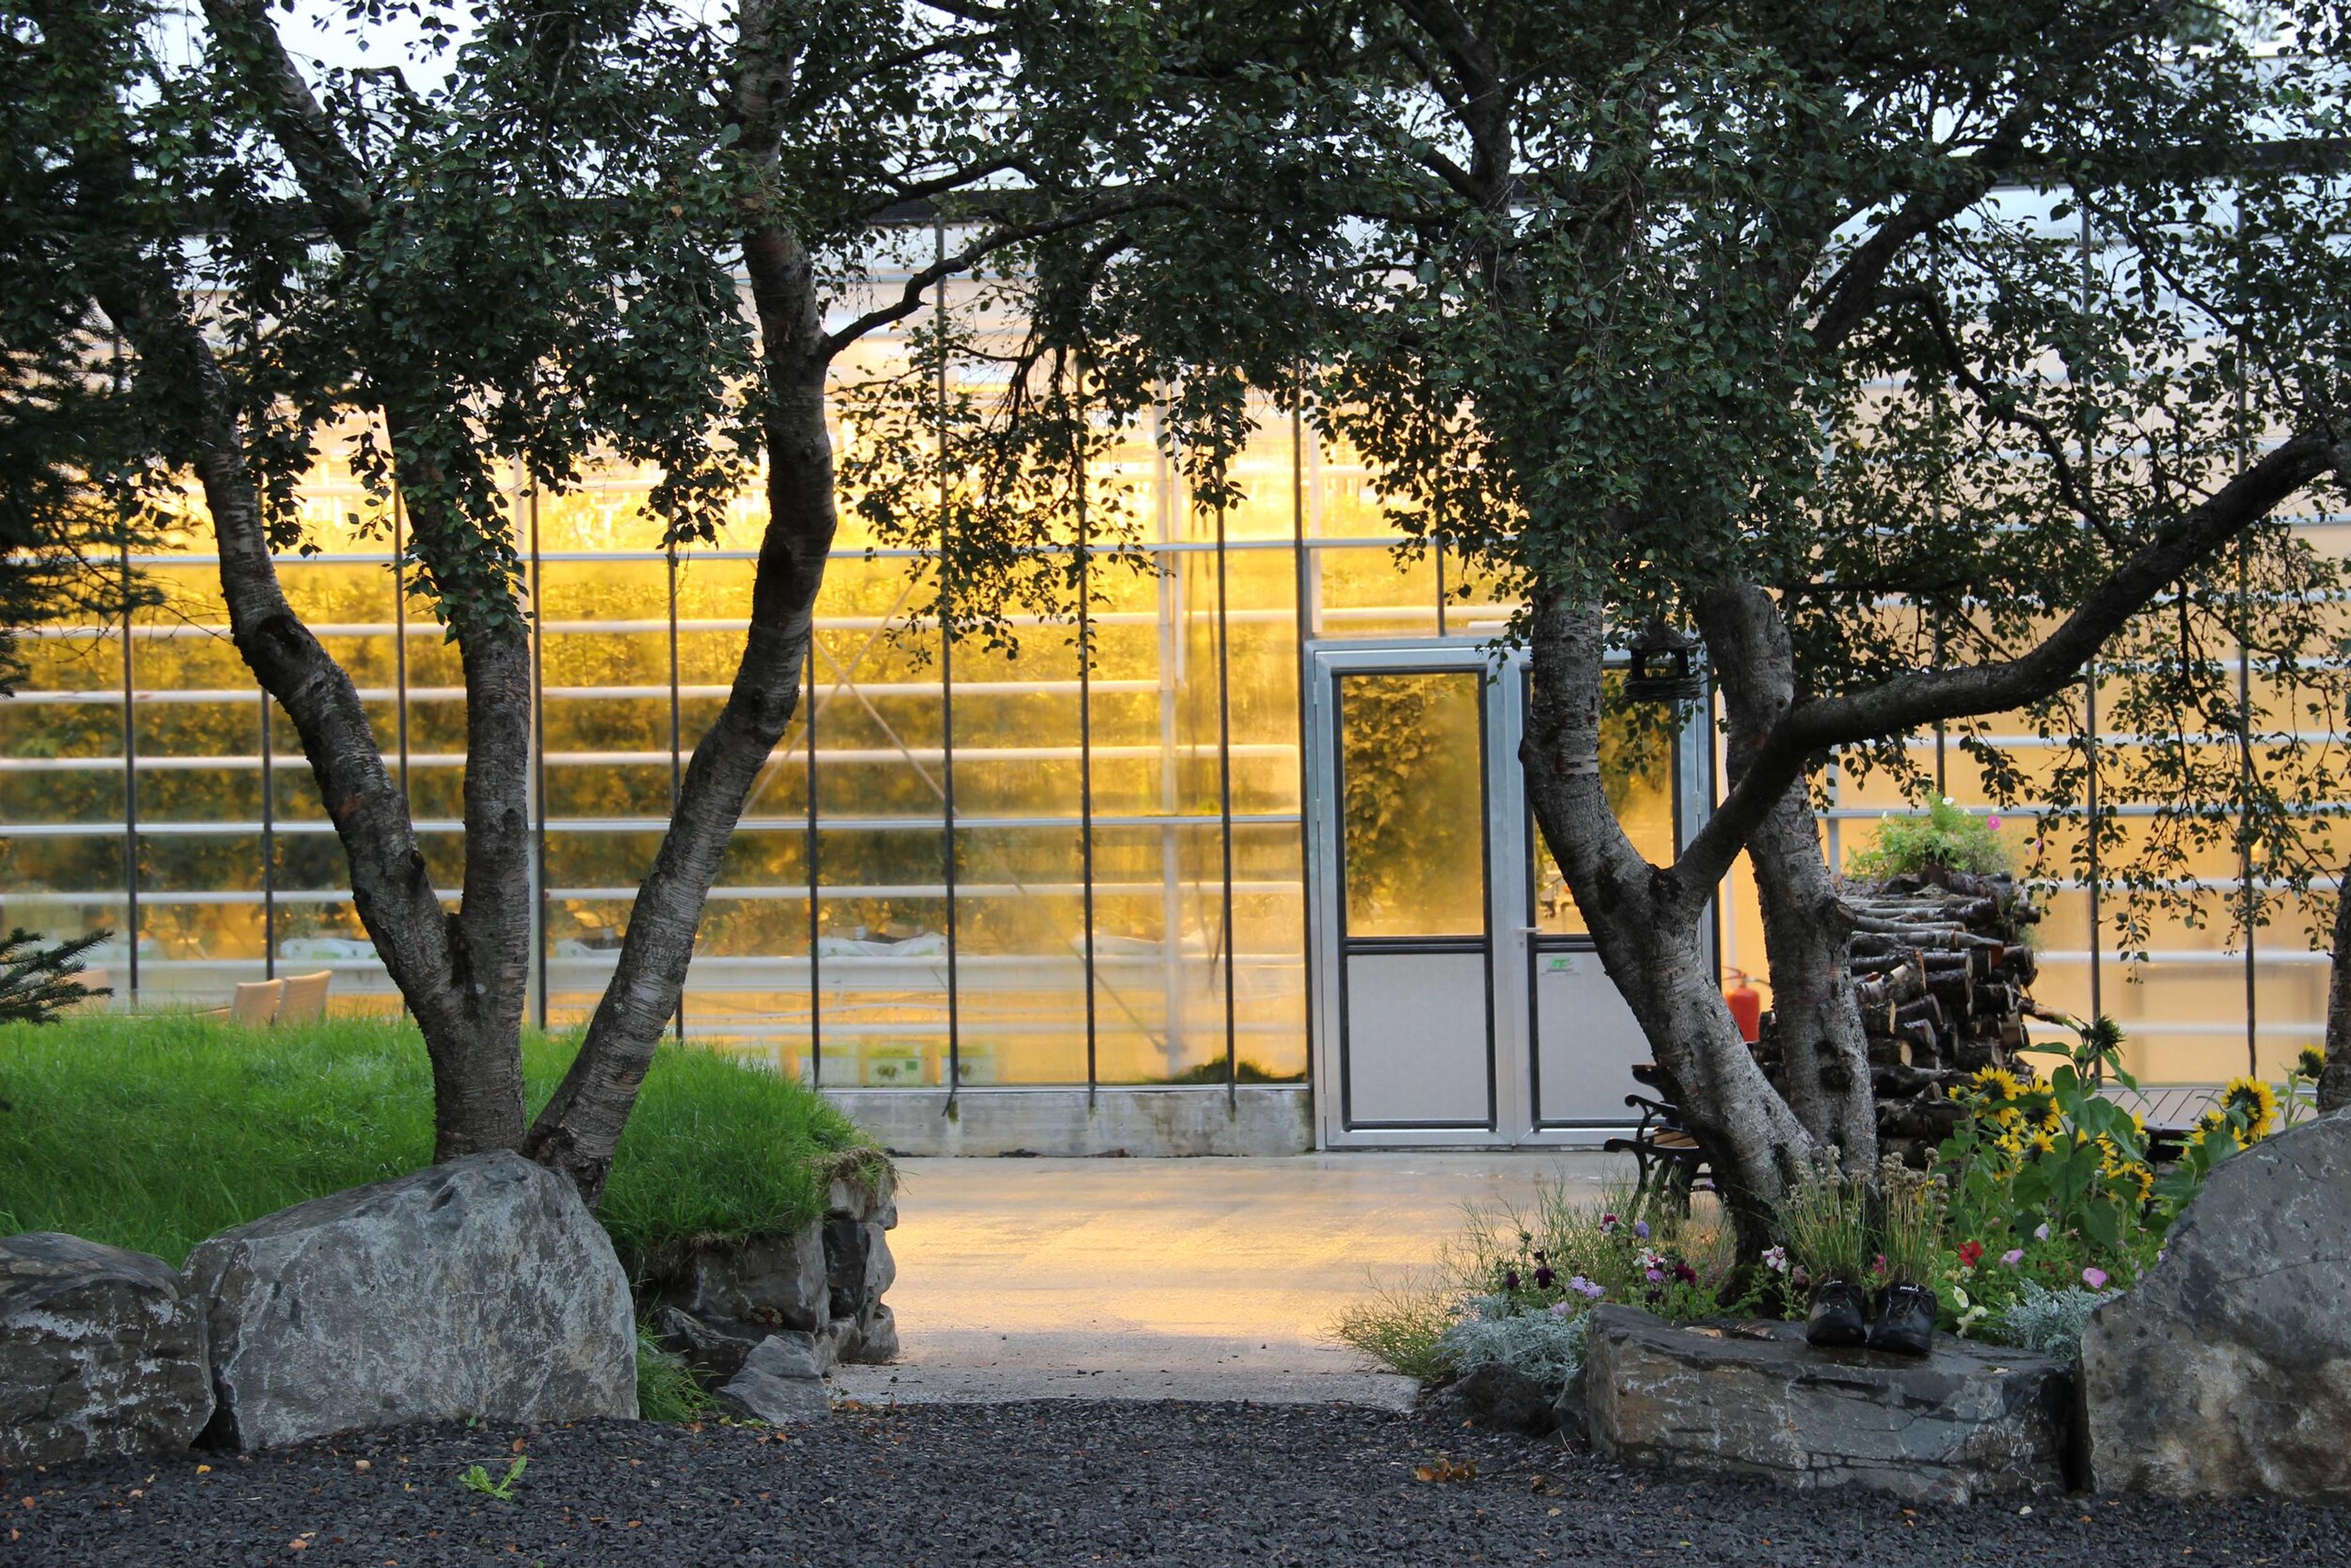  A tranquil entrance to the greenhouse framed by elegant trees and warm lighting, reflecting a serene evening atmosphere.